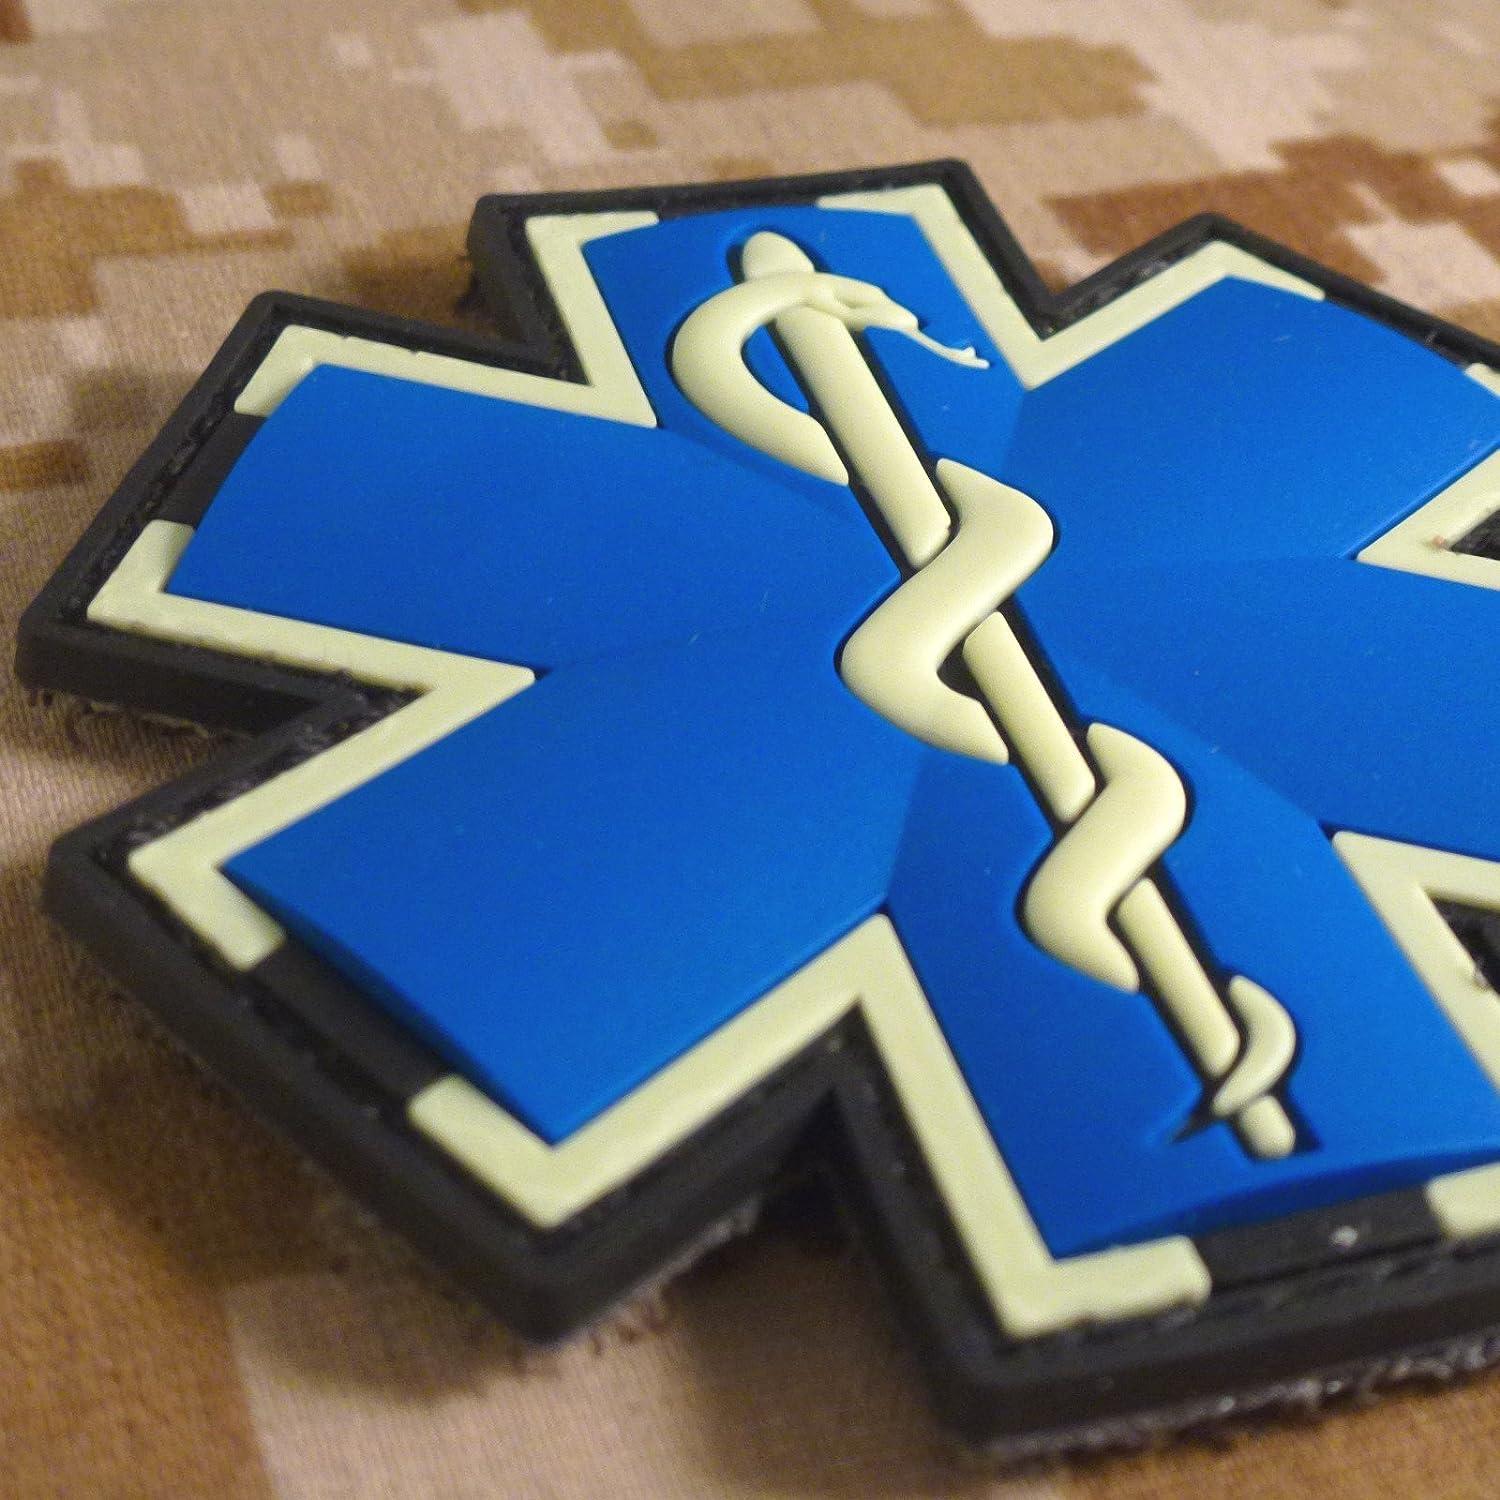 6 x 3 MEDIC Patch-Glow in the Dark